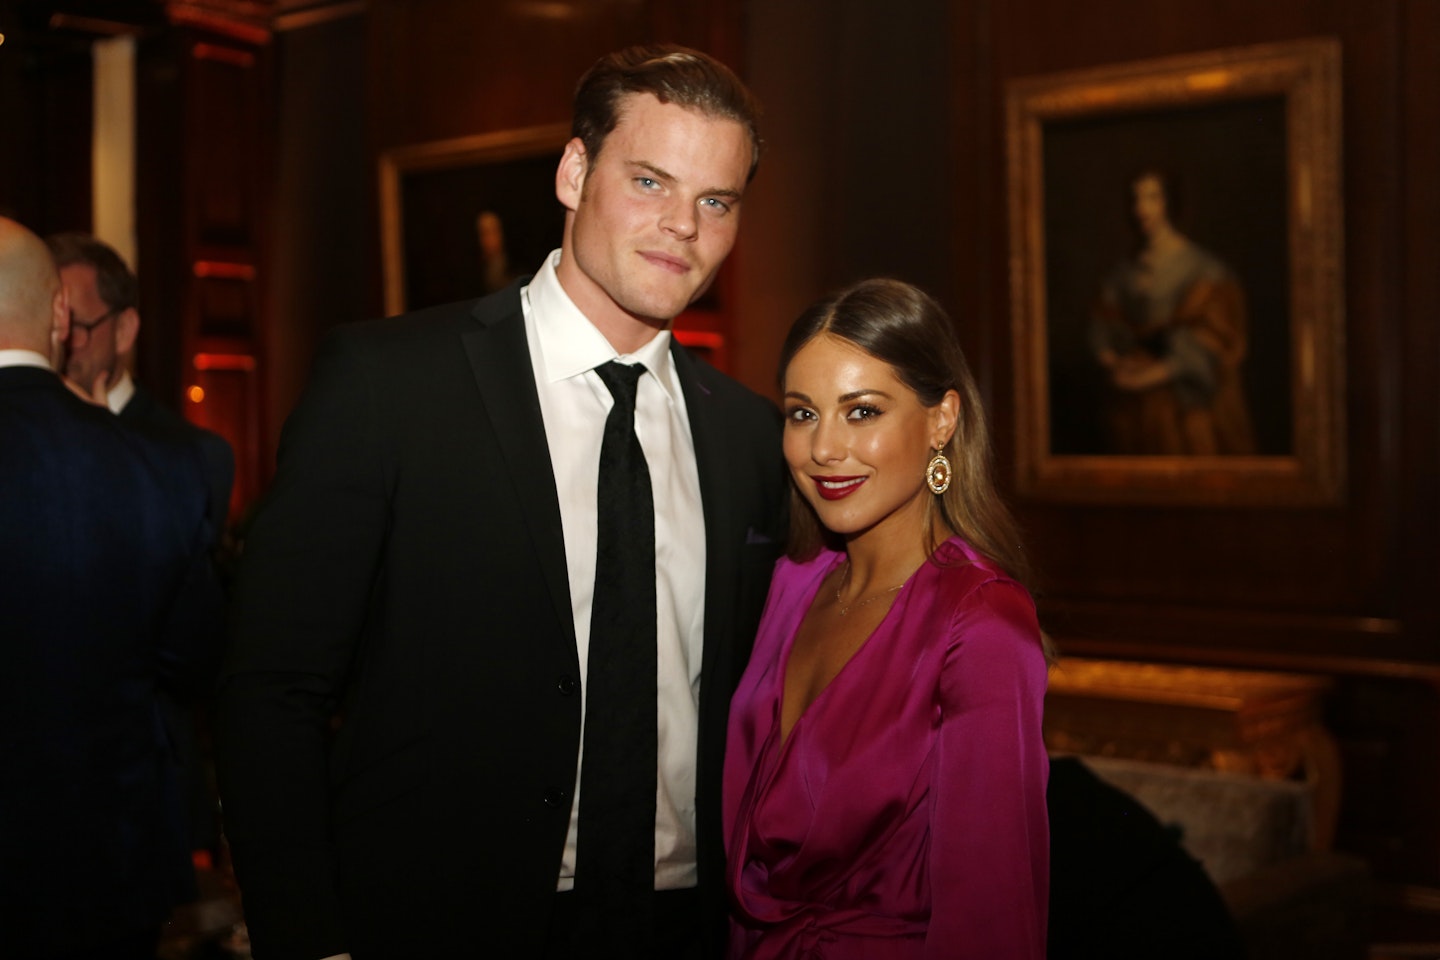 Louise Thompson and Ryan Libbey engaged